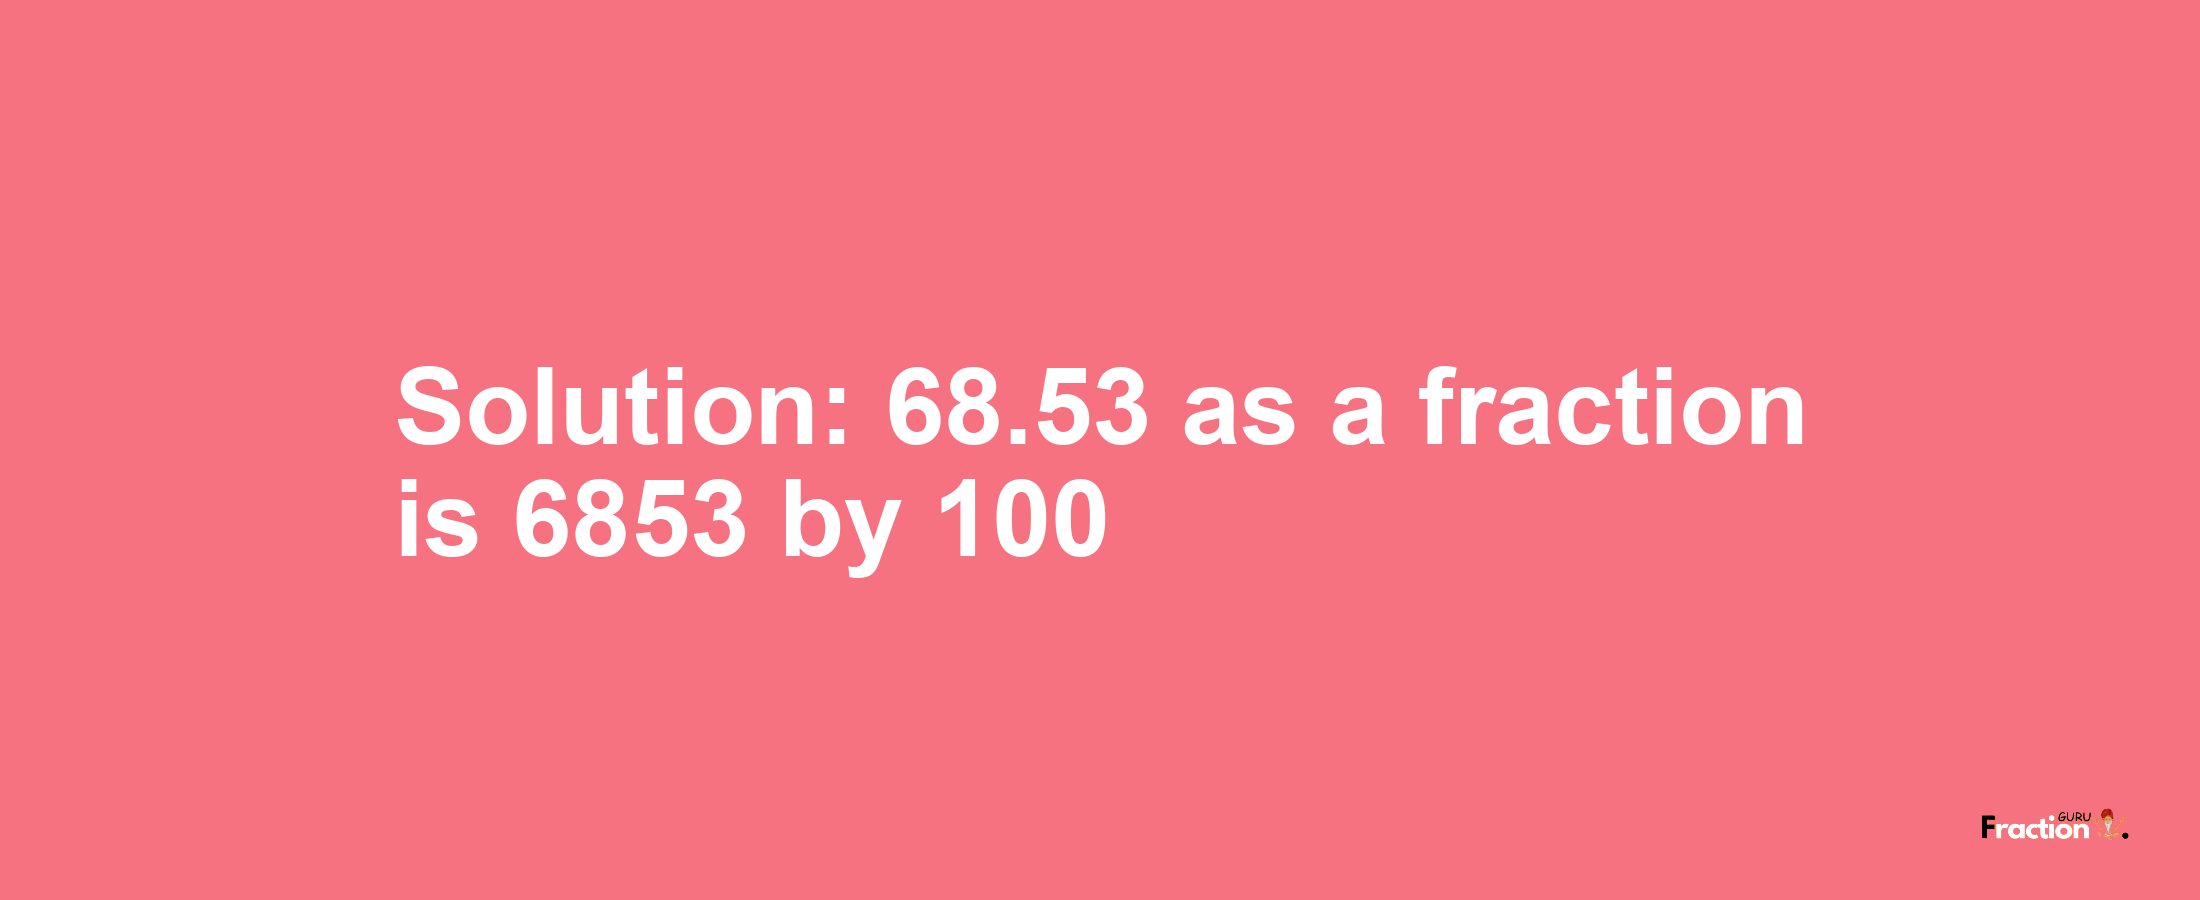 Solution:68.53 as a fraction is 6853/100